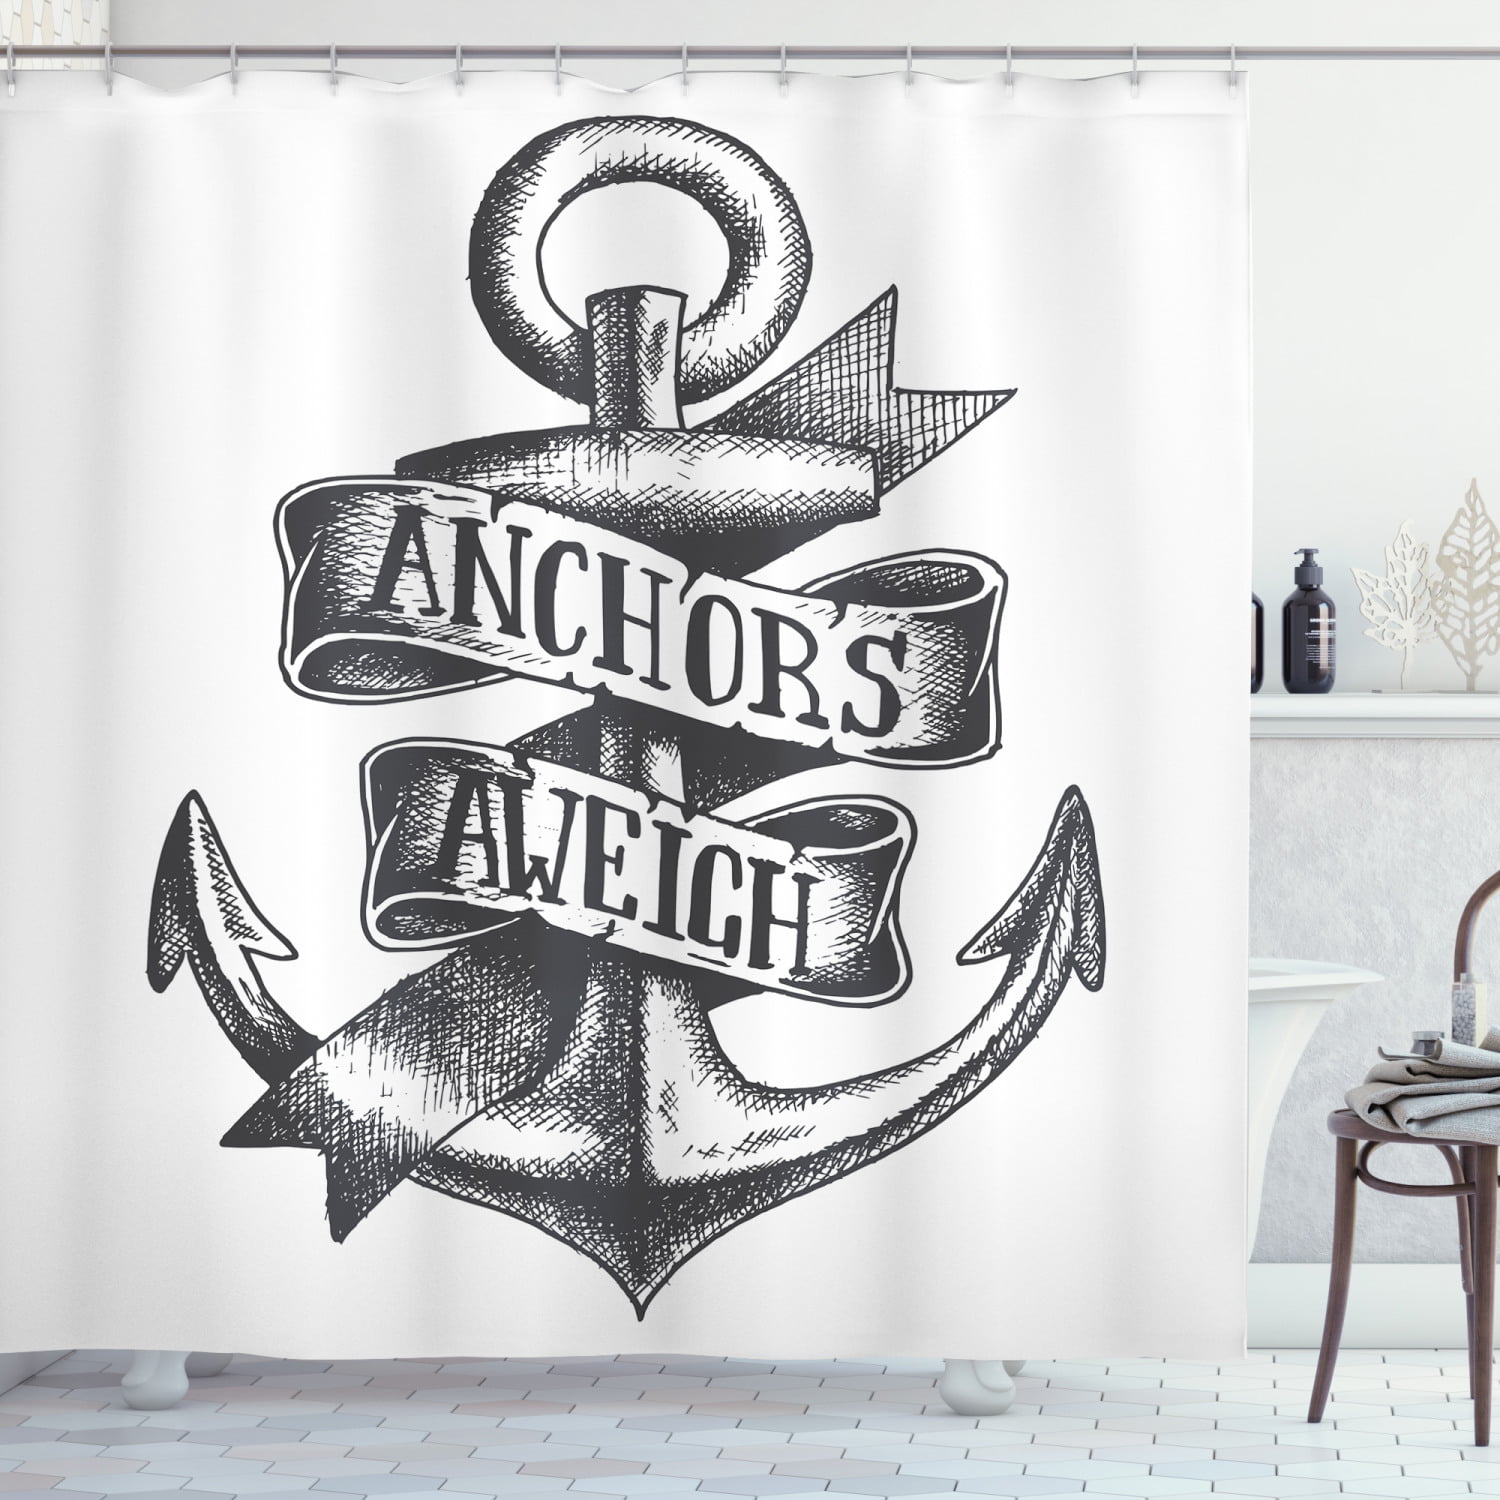 Anchor Shower Curtain Tattoo Style Old, Vintage Anchor Shower Curtain